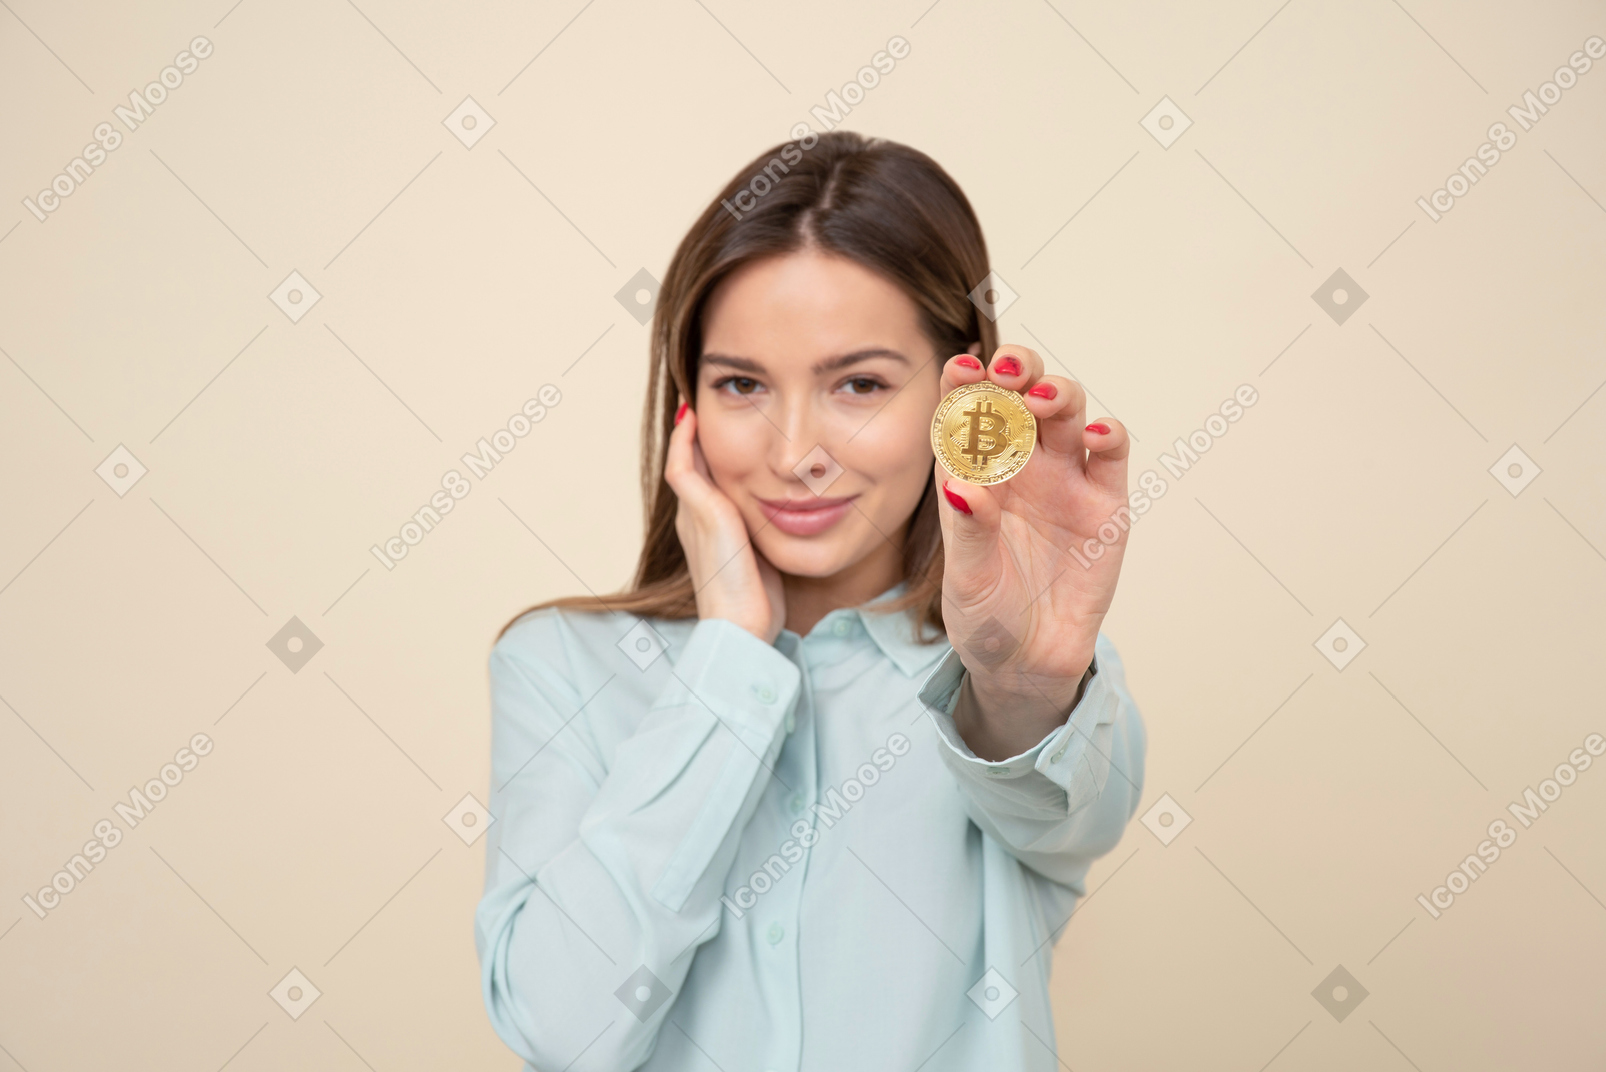 Attractive young girl showing a bitcoin